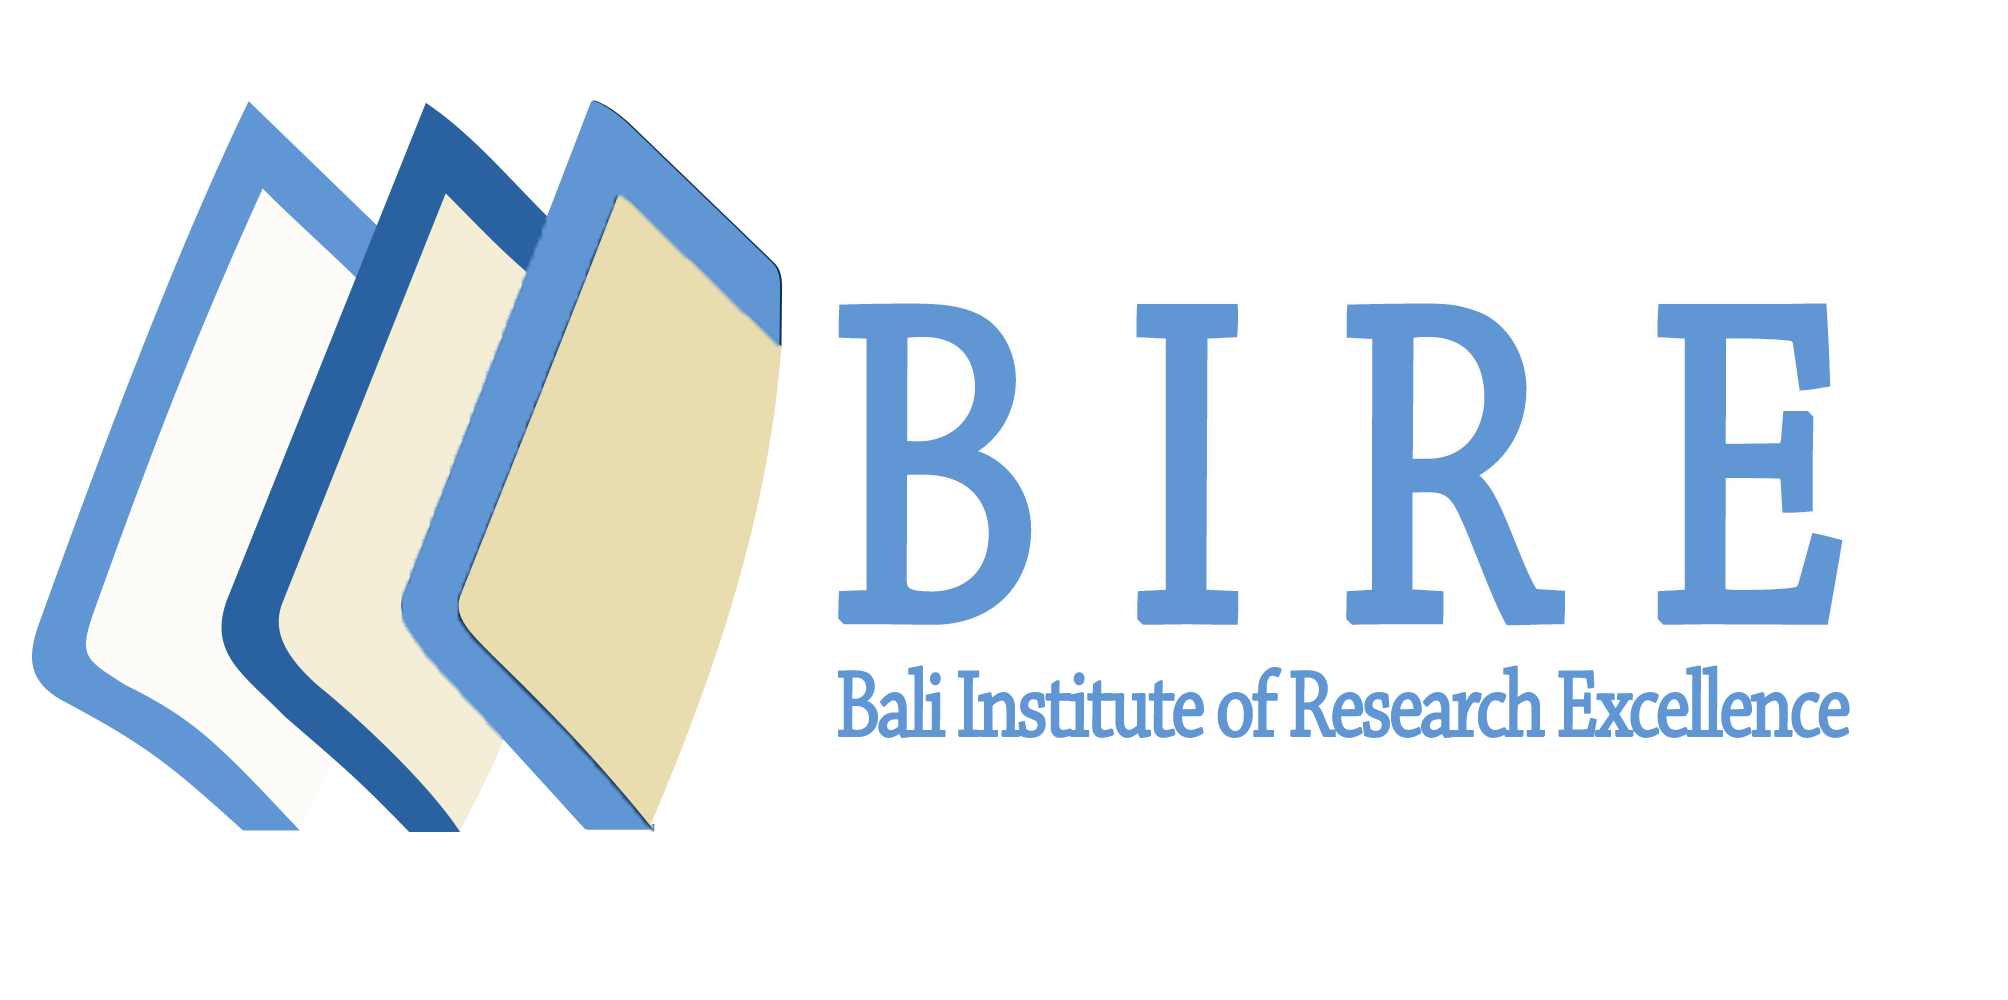 EBMS-2022 3rd International Conference on Research Perspectives on Entrepreneurship Education, Business Management and Social Sciences EBMS